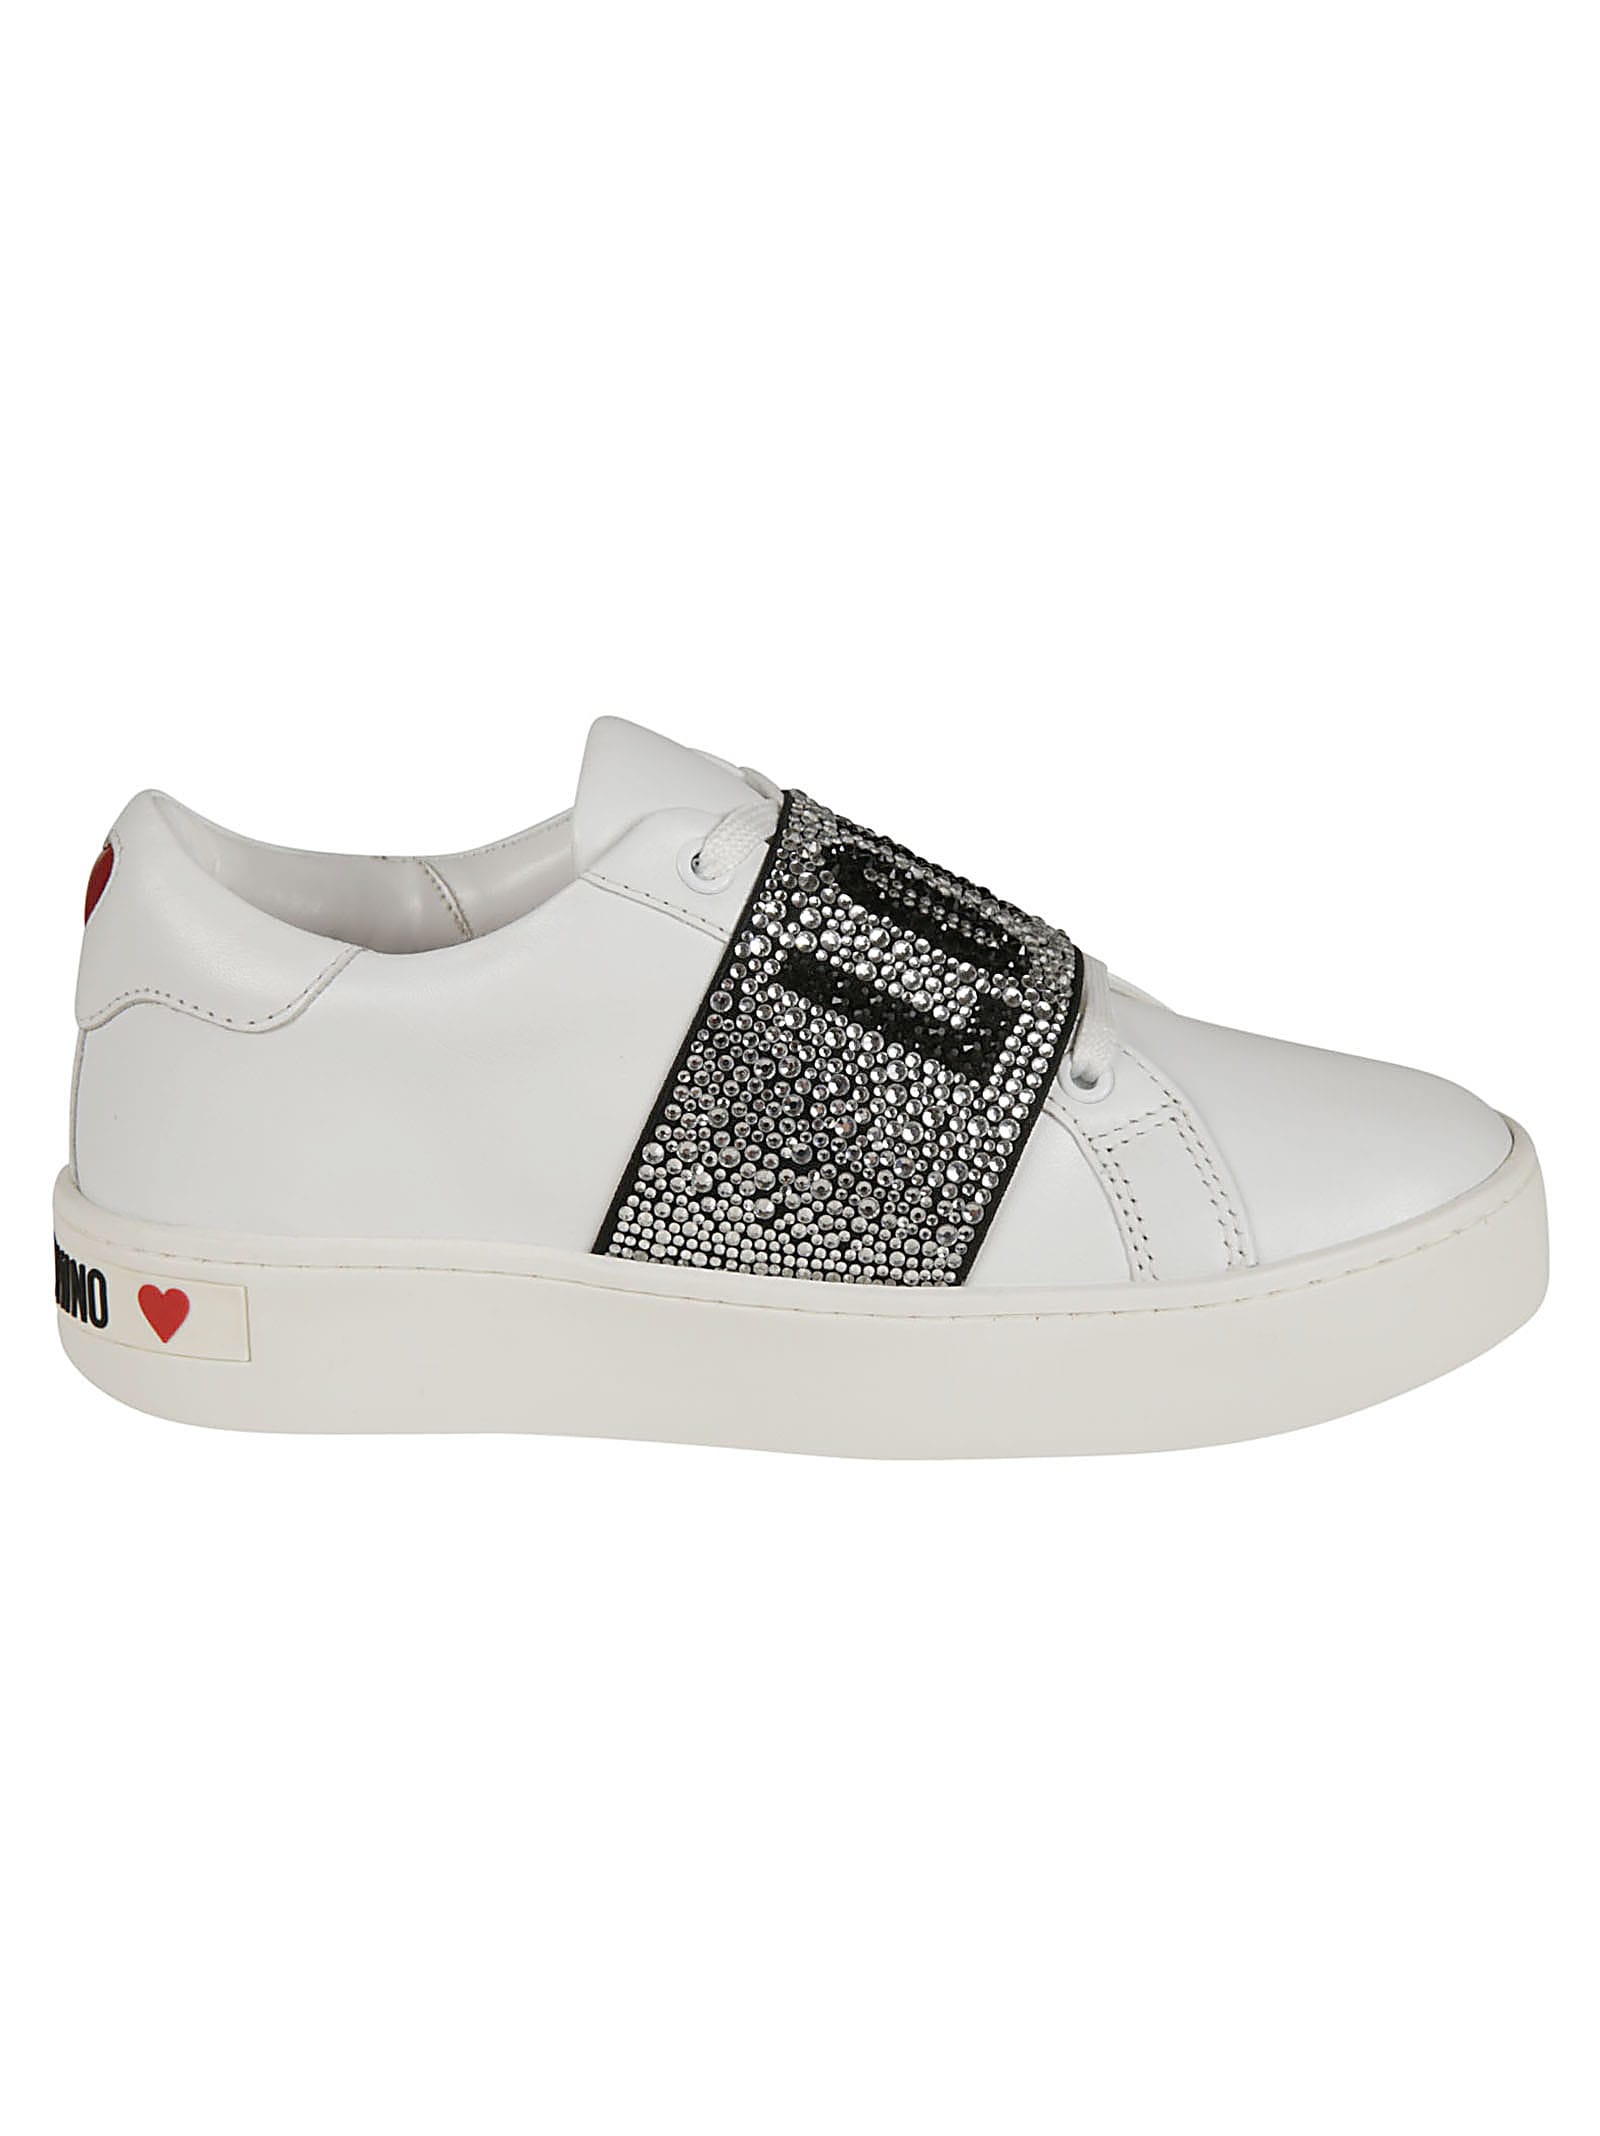 Love Moschino Crystal Embellished Love Sneakers